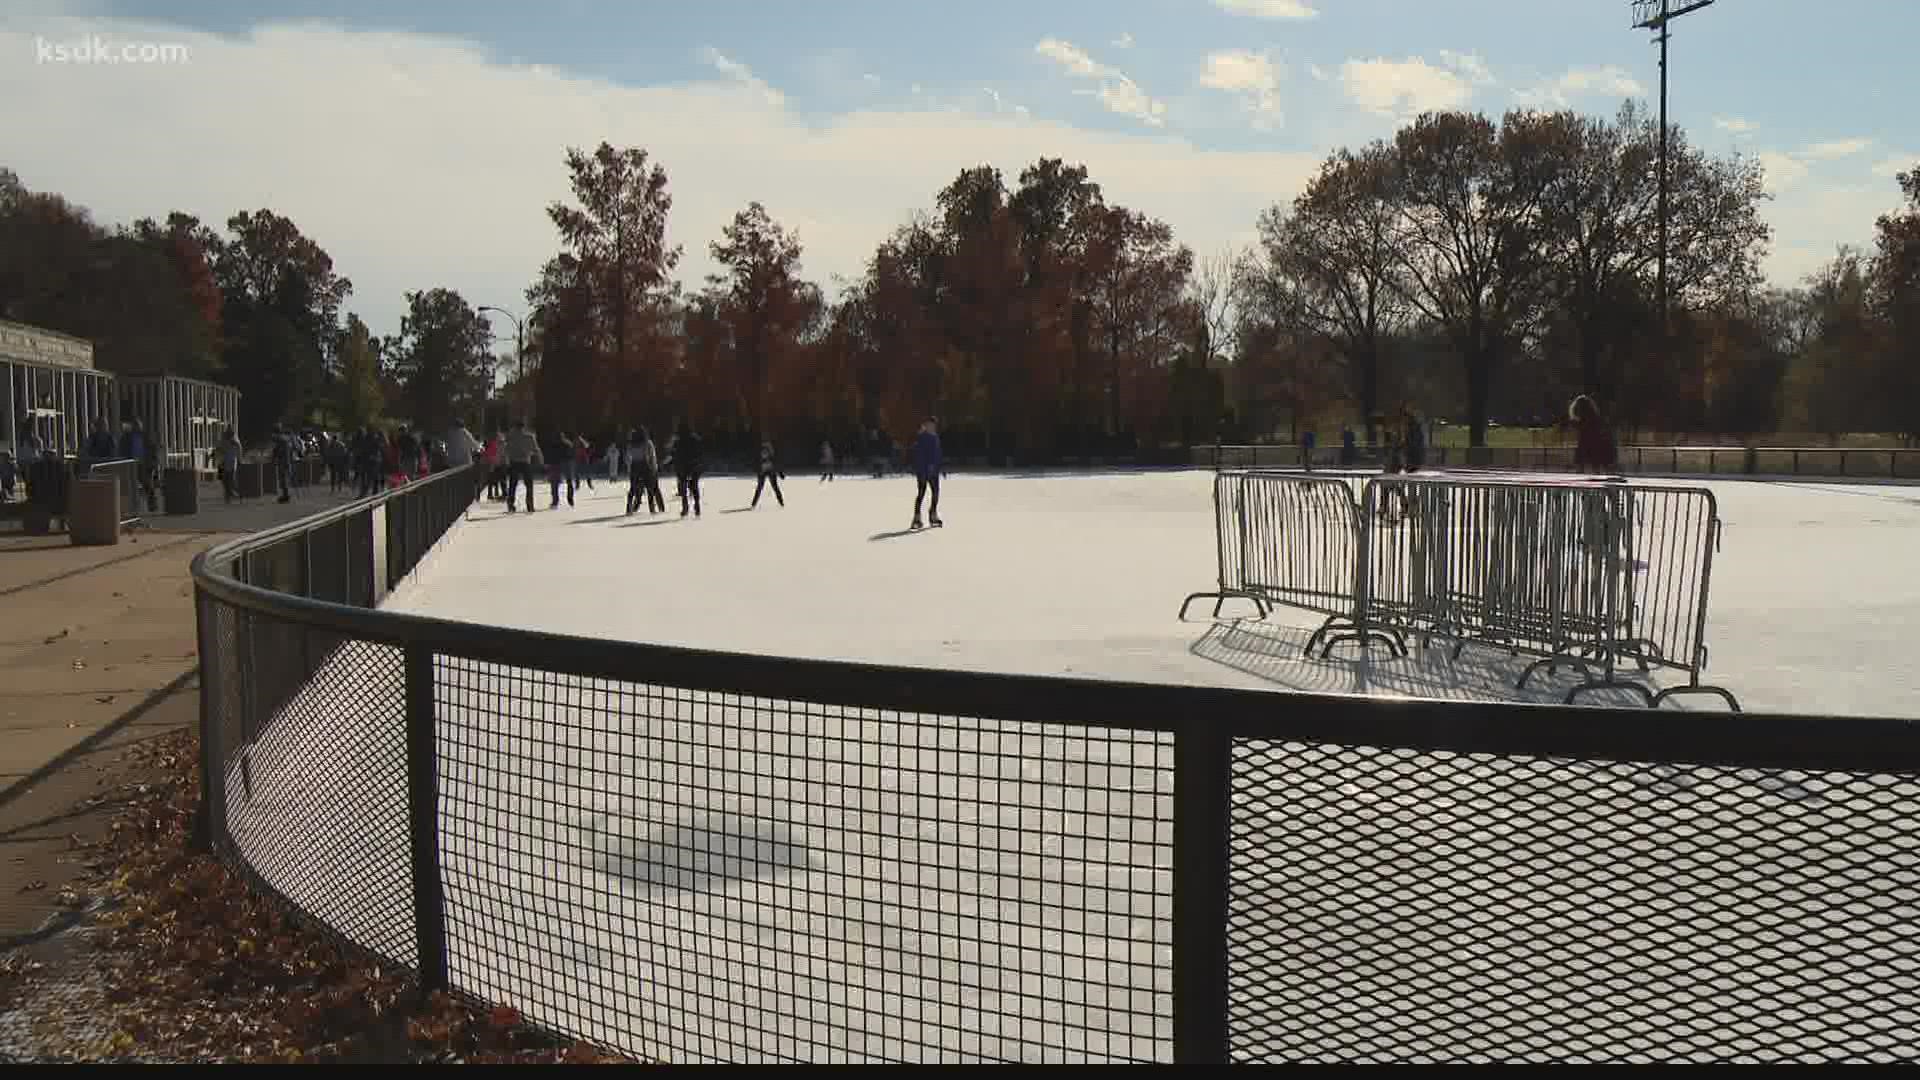 This will be the first time in nearly two decades the rink is undergoing major changes